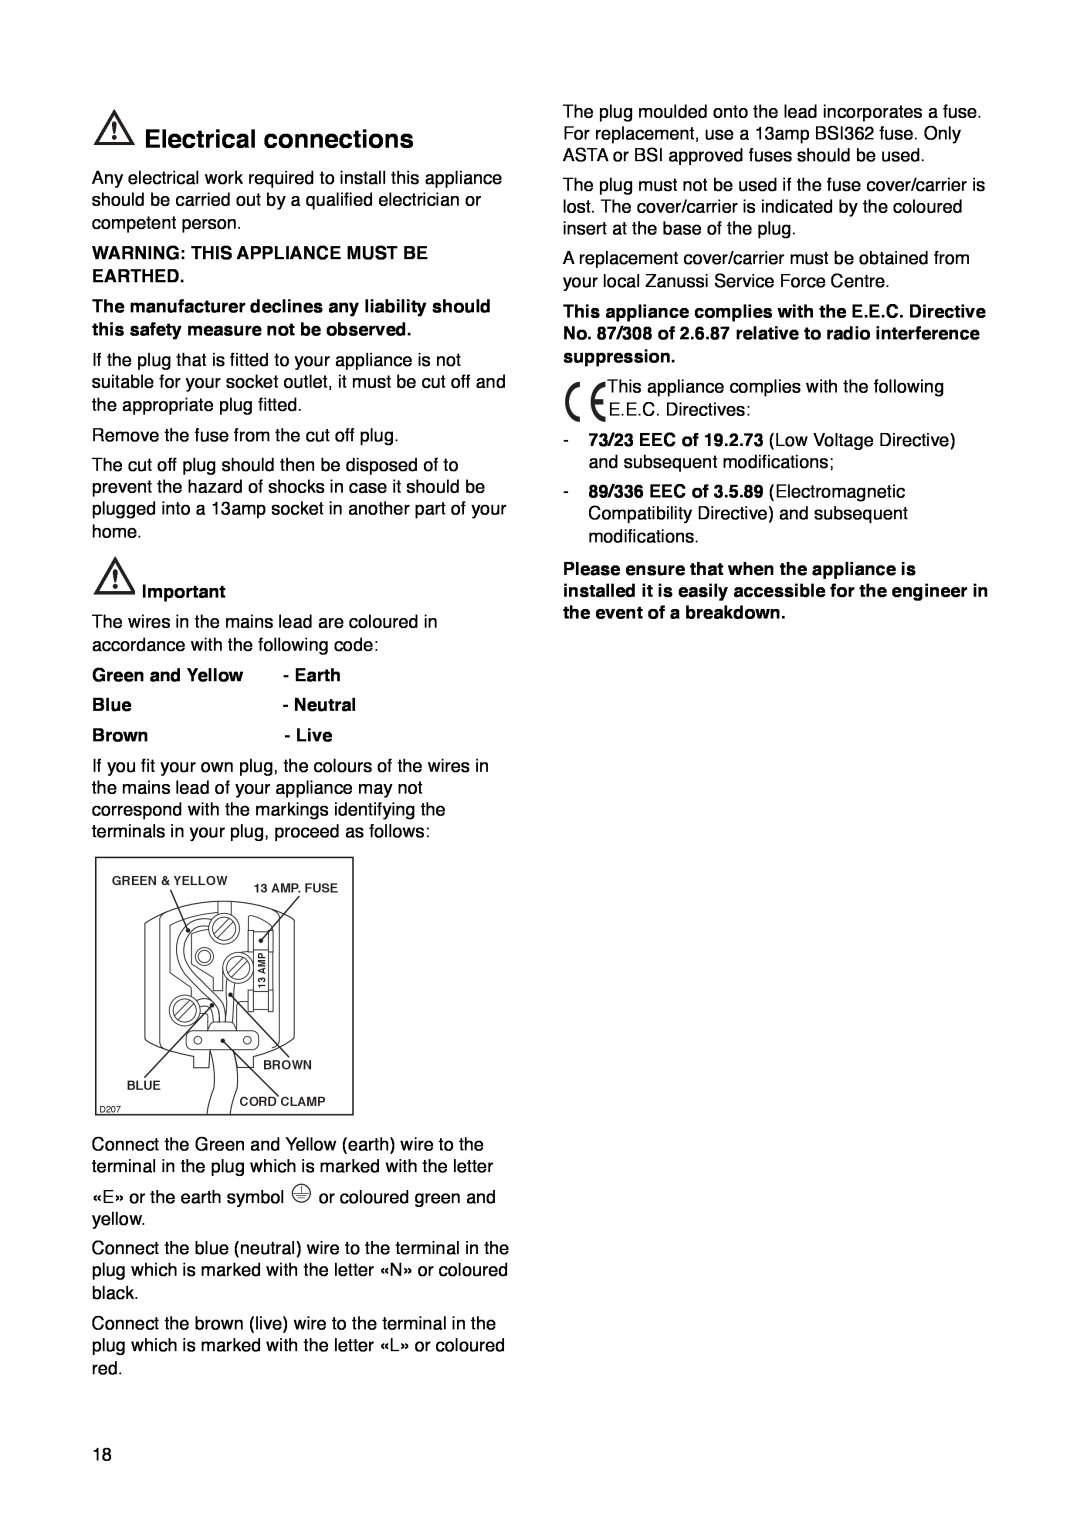 Zanussi ZK 57/38 R manual Electrical connections, Warning This Appliance Must Be Earthed, Green and Yellow 